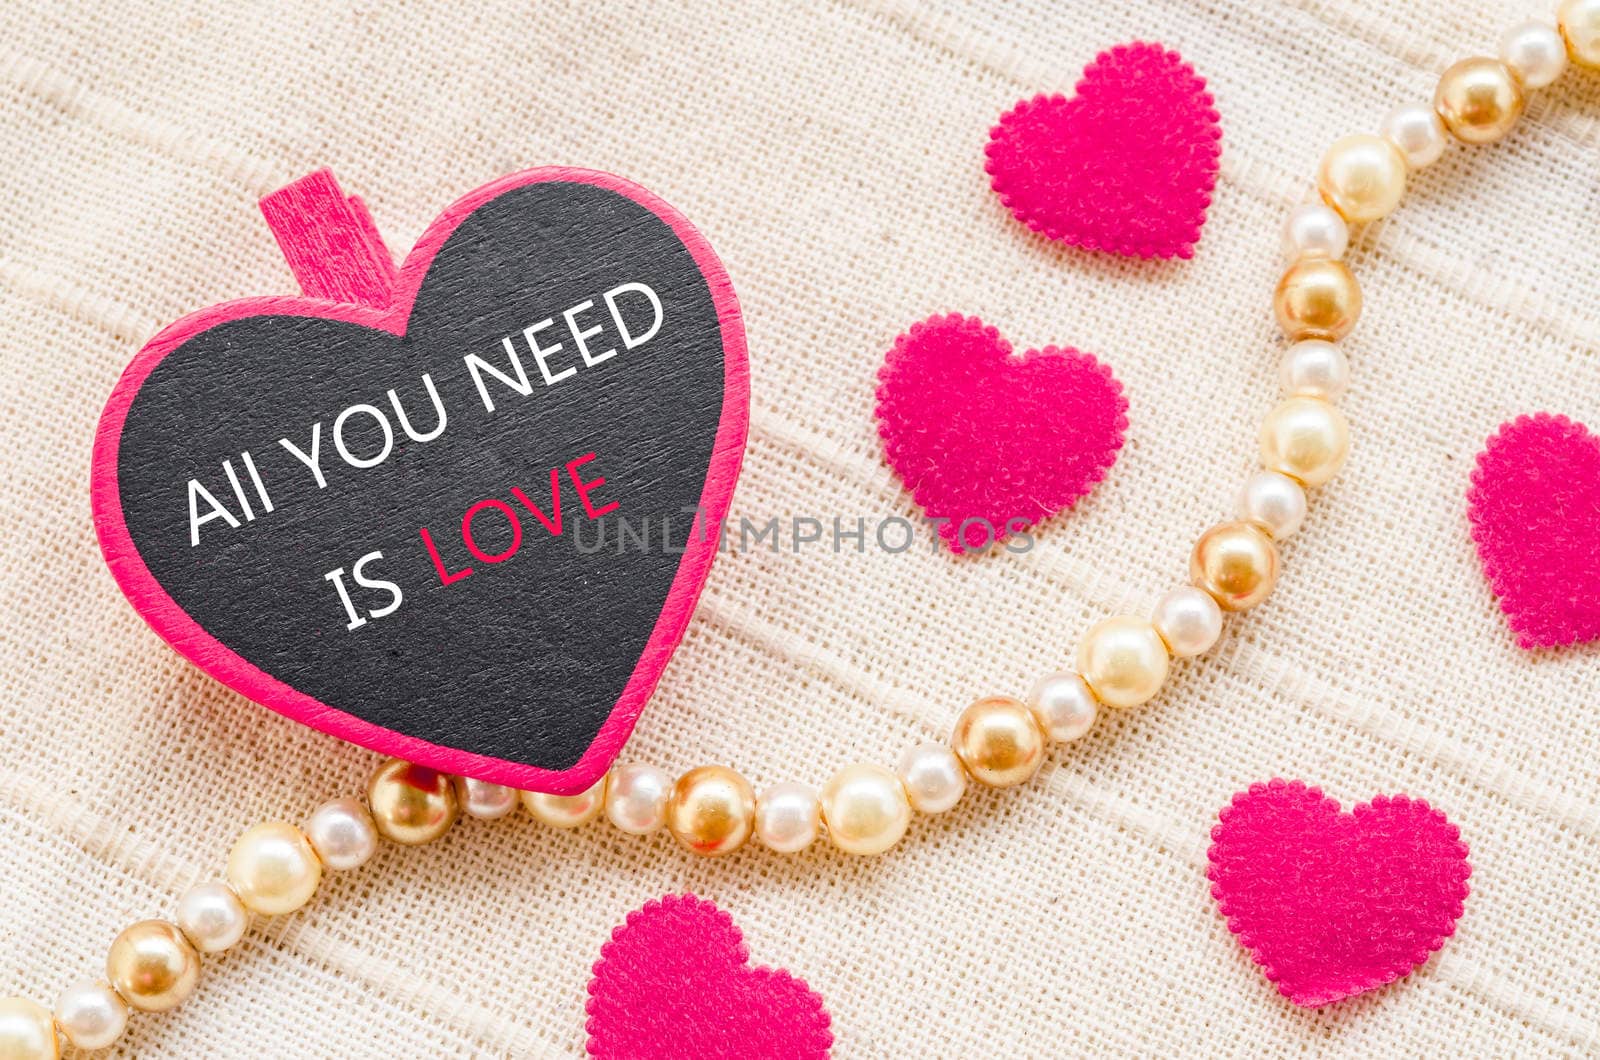 All you need is love on pink heart wooden clamps and on fabric background.